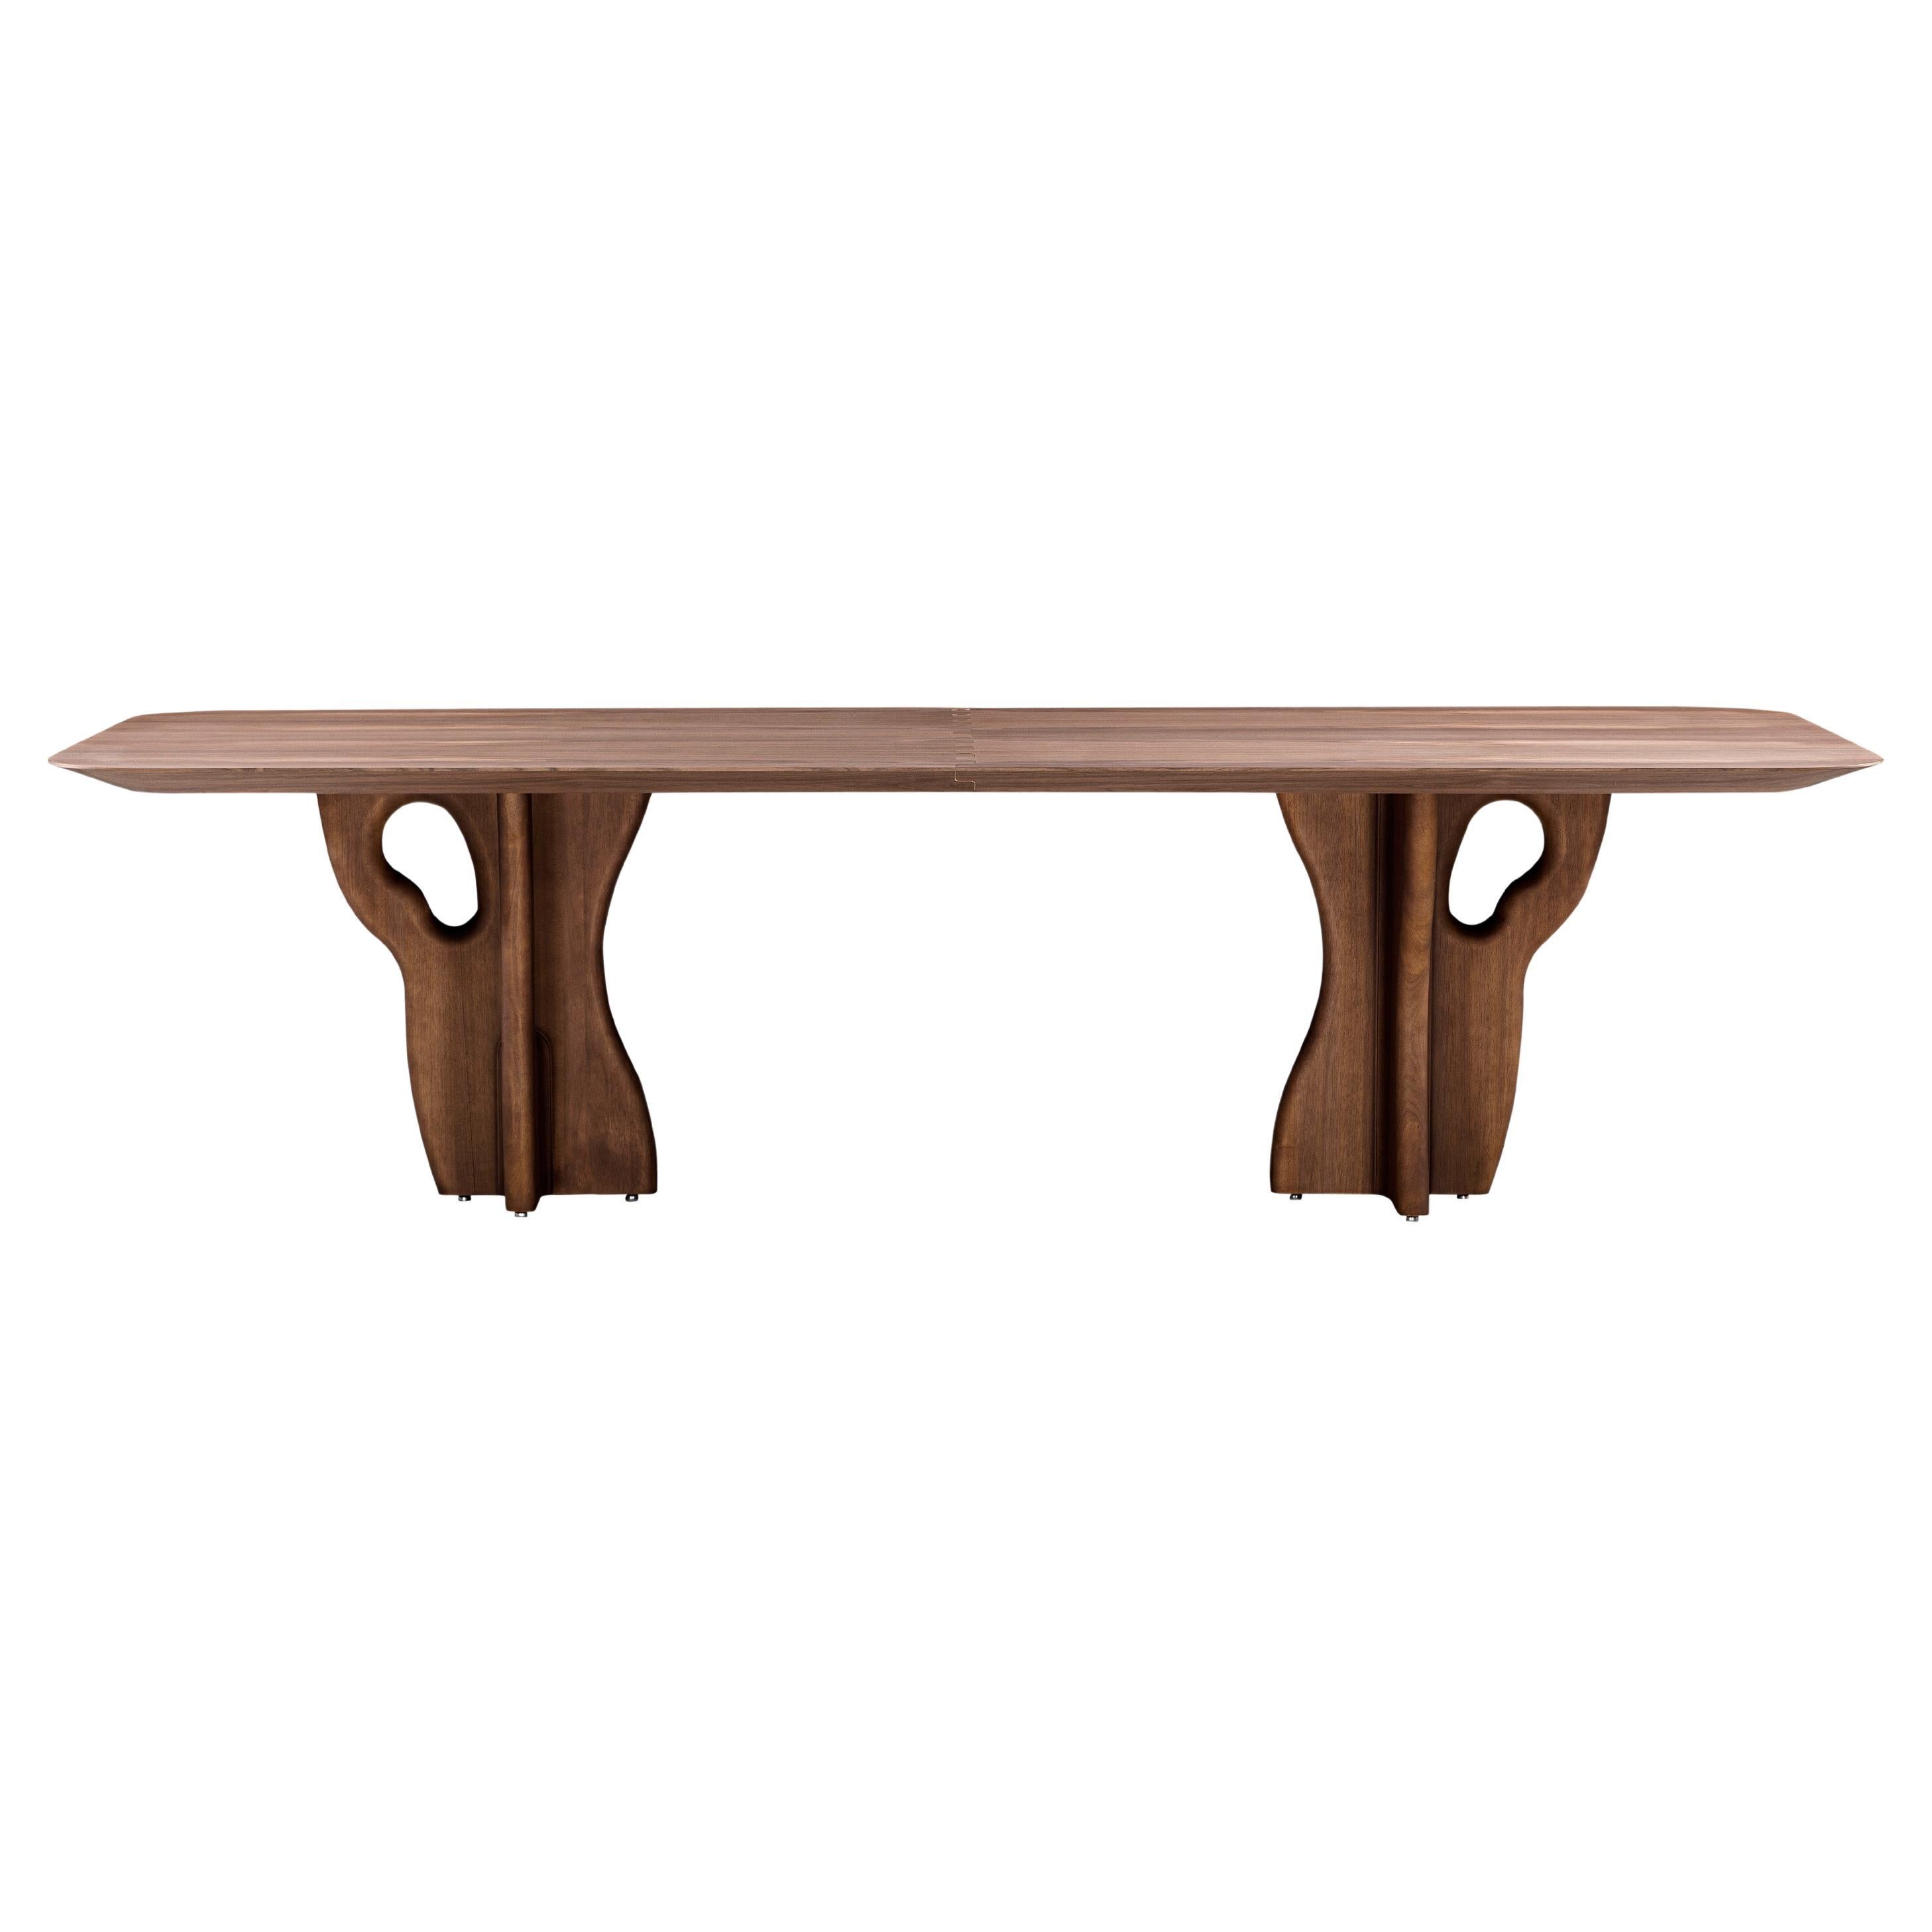 Suma Dining Table with Walnut Veneered Top and Organic Solid Wood Legs 110'' For Sale